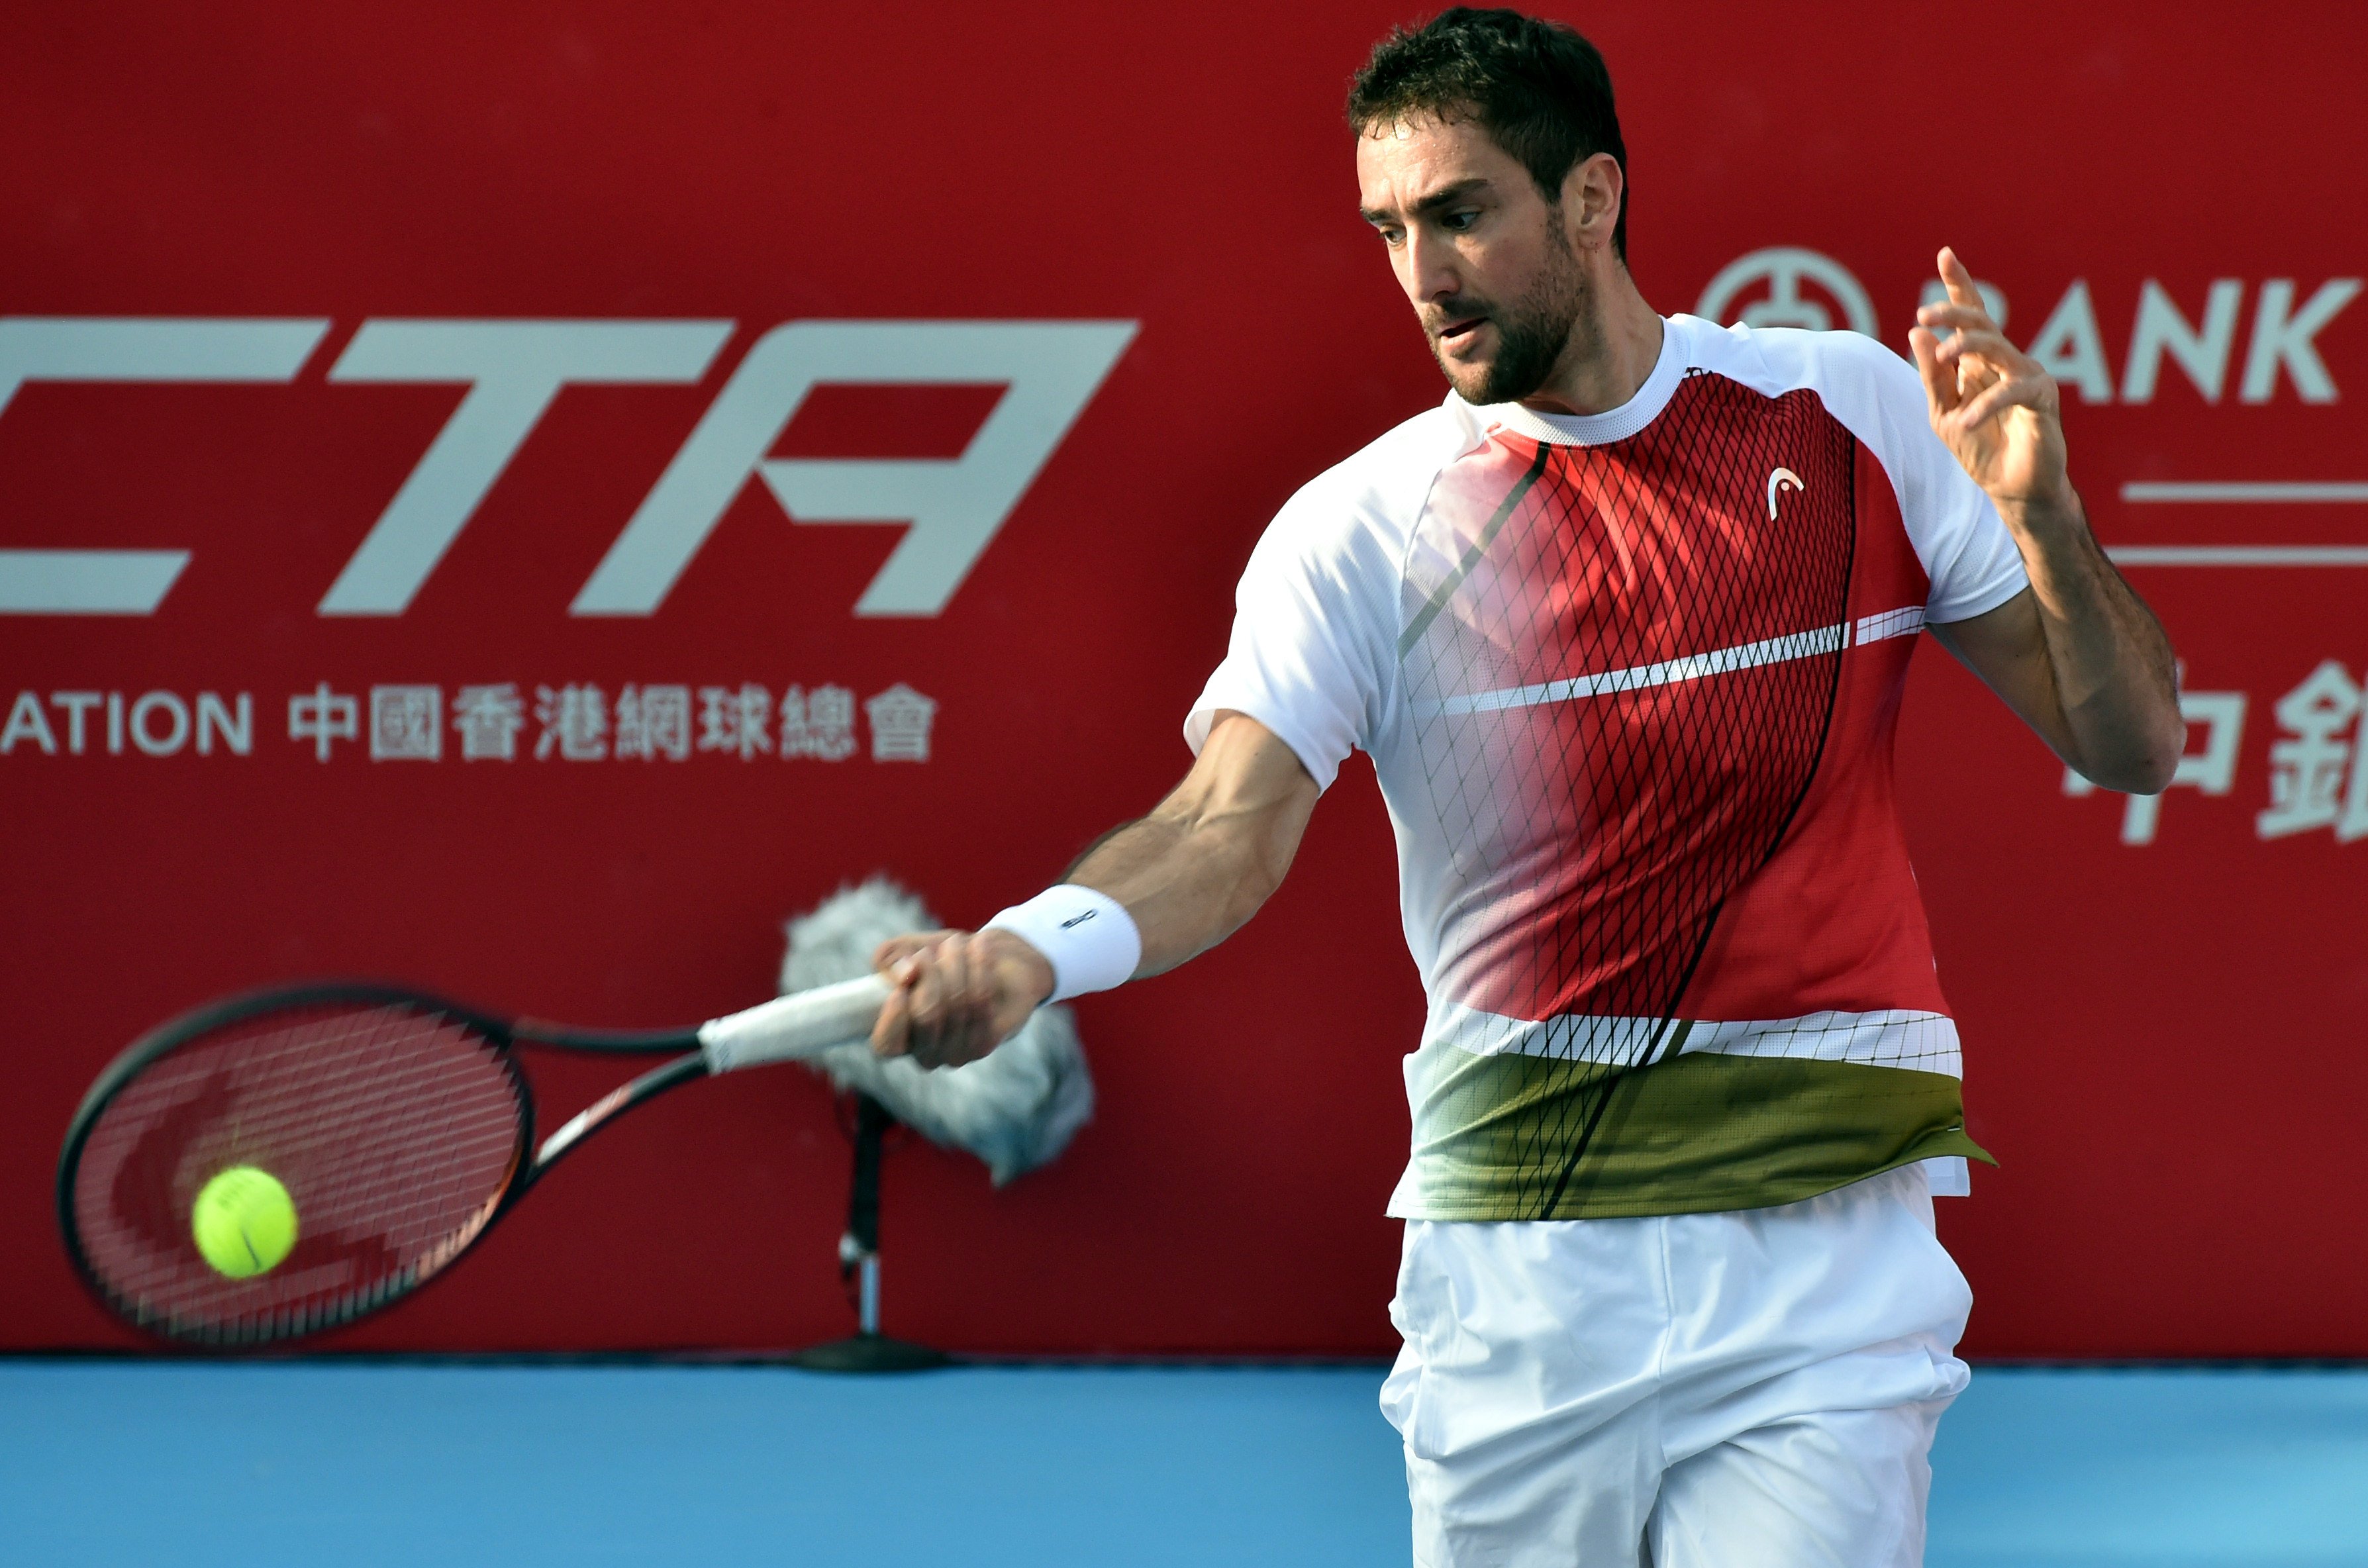 Marin Cilic stays focused during his first-round singles match at the Hong Kong Tennis Open. Photo: Xinhua